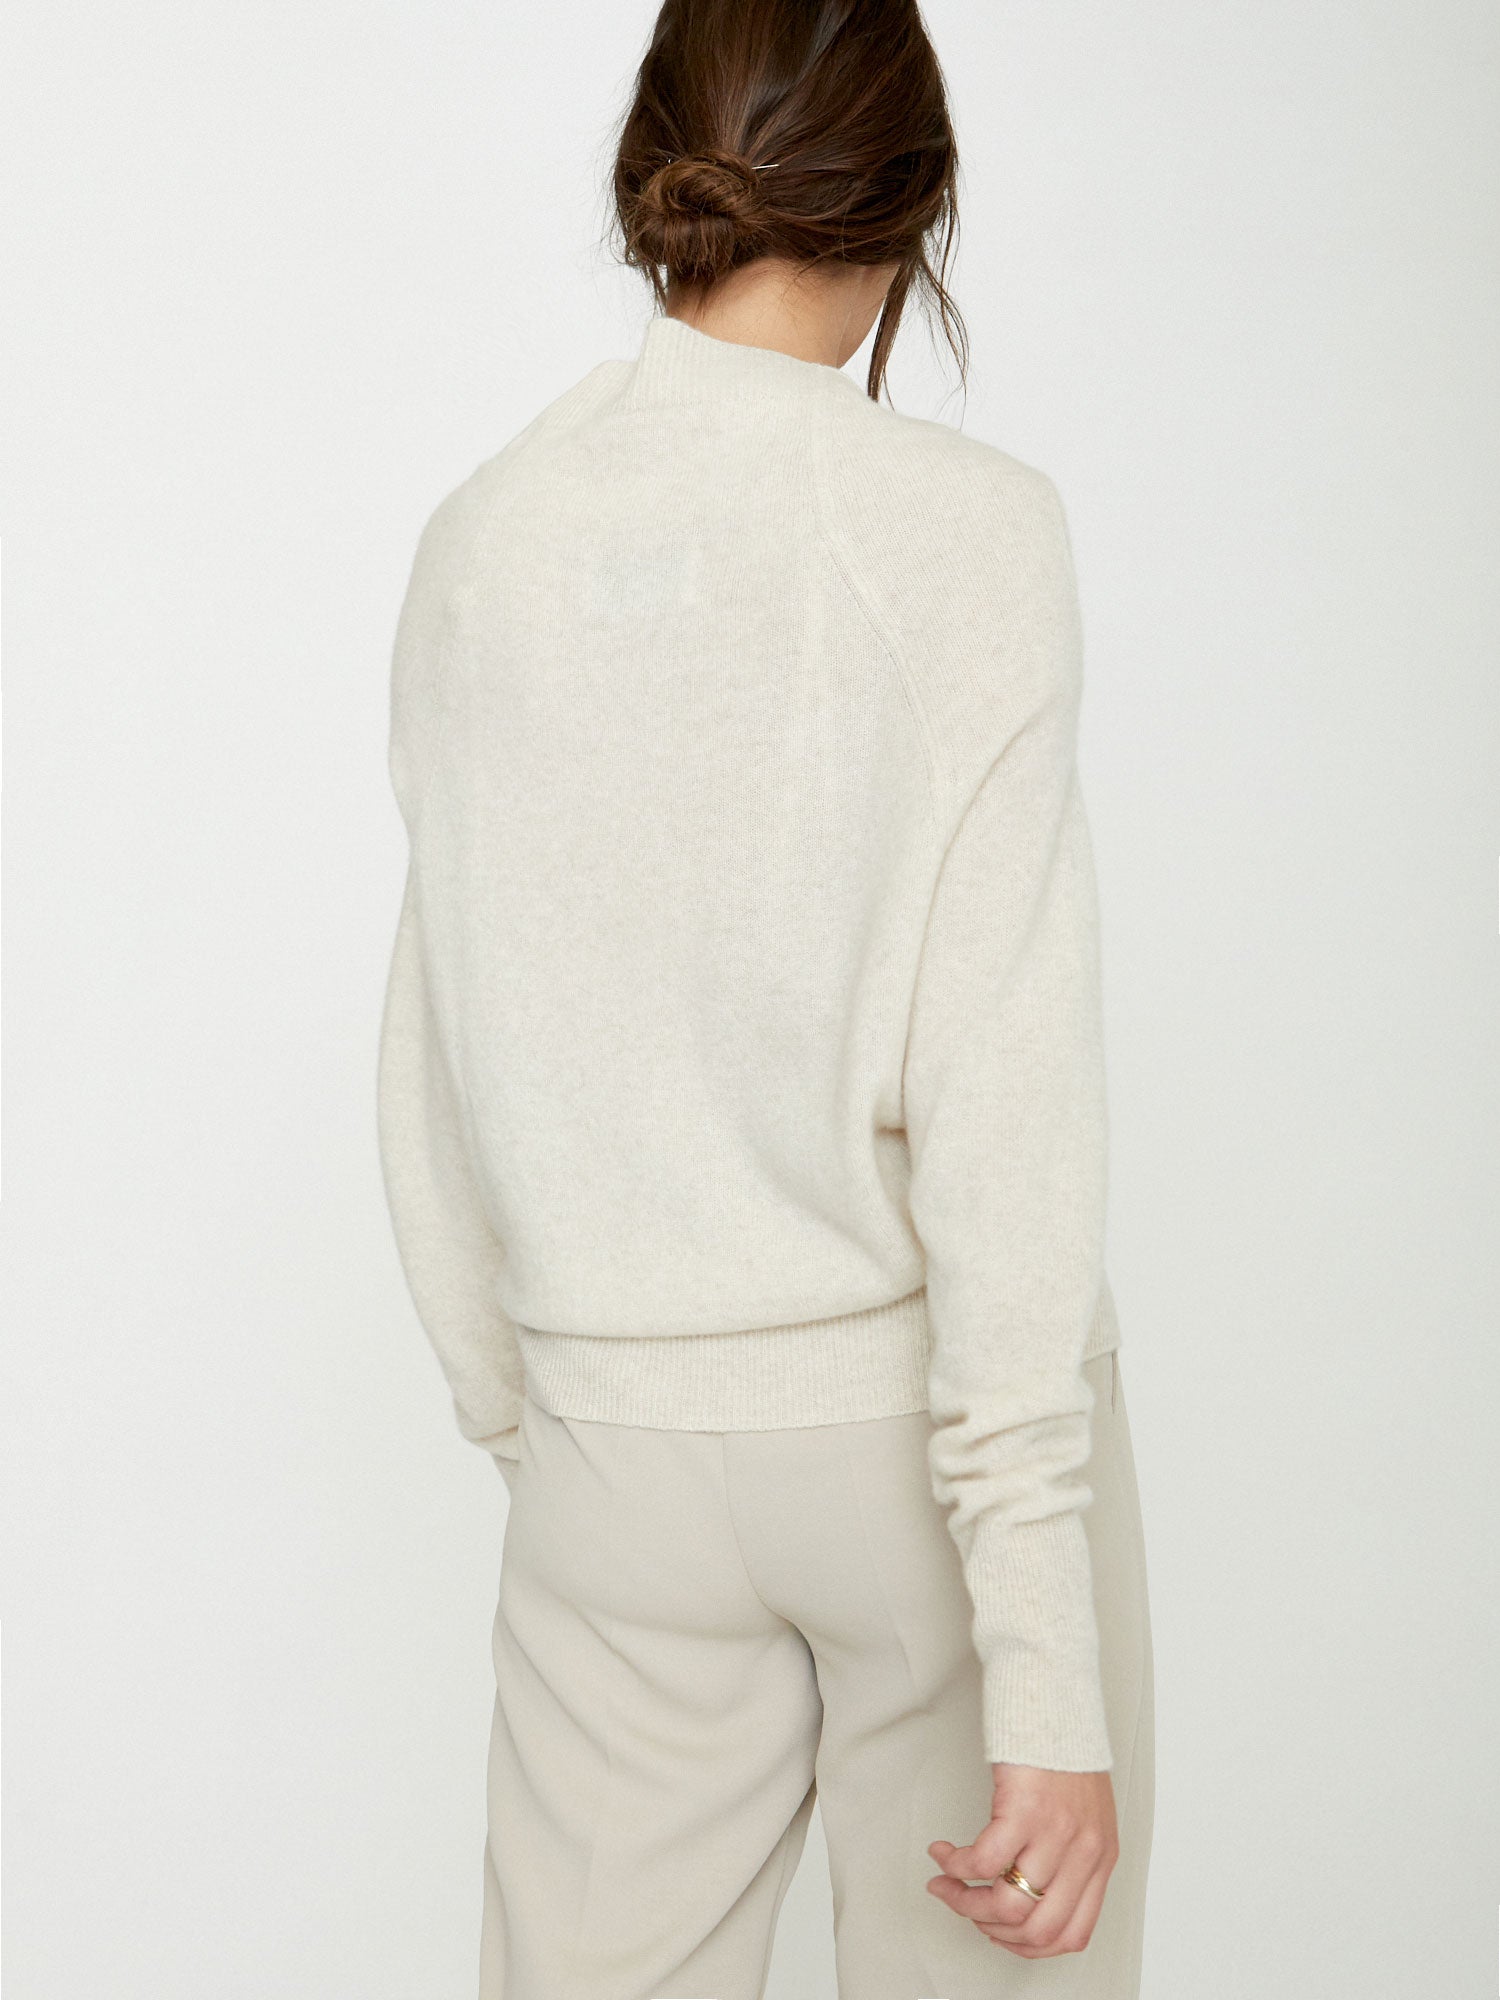 Lori cashmere ivory off shoulder sweater back view